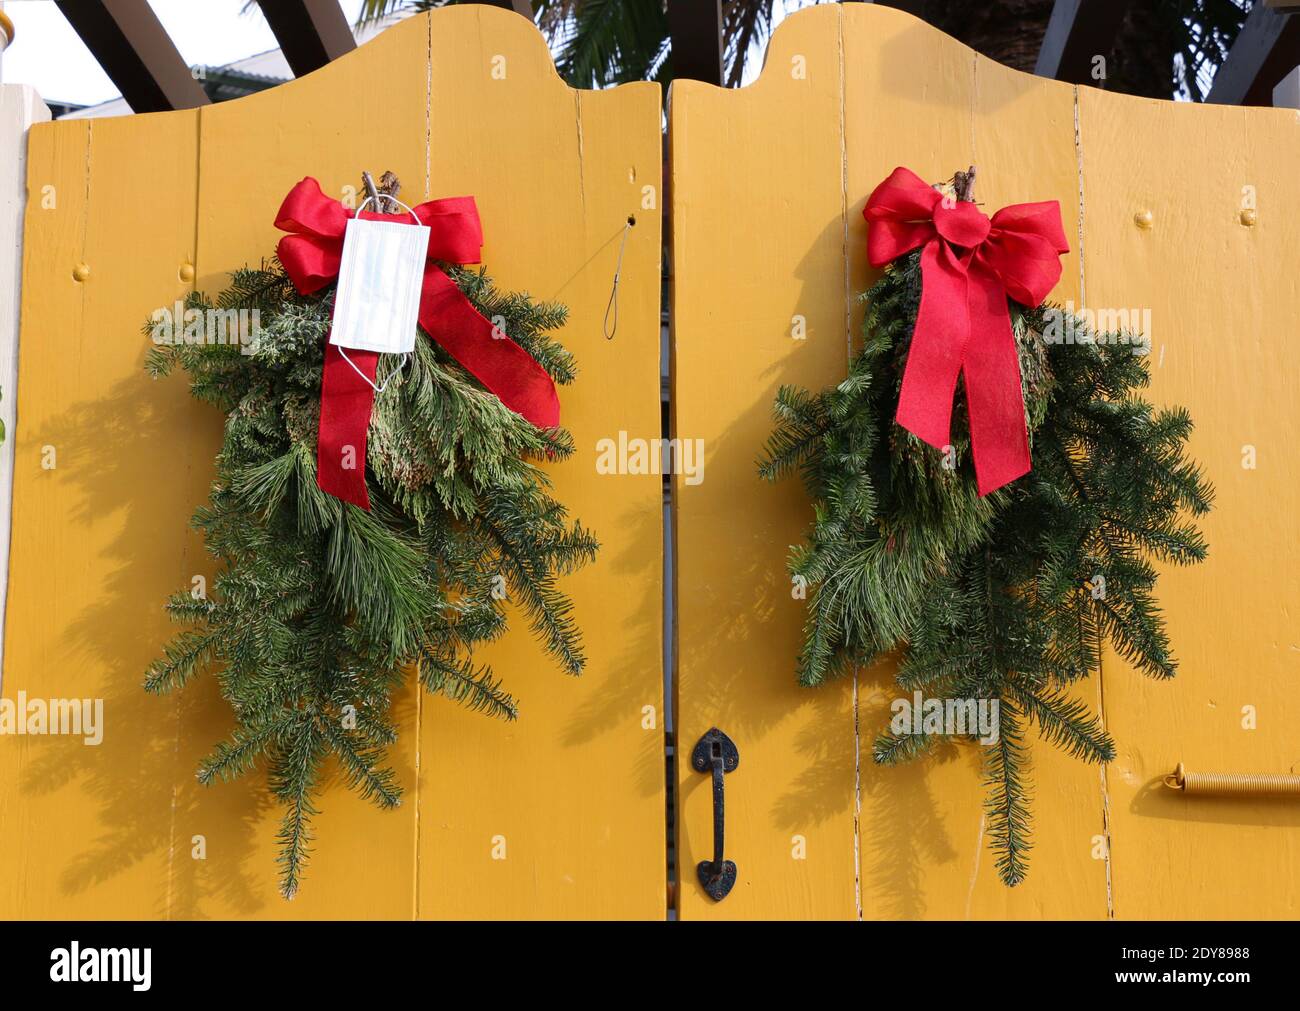 A white surgical mask hangs with a red bow on a decorative display of boughs of pine branches on an old yellow wooden gate.  Christmas Eve, 2020. Stock Photo